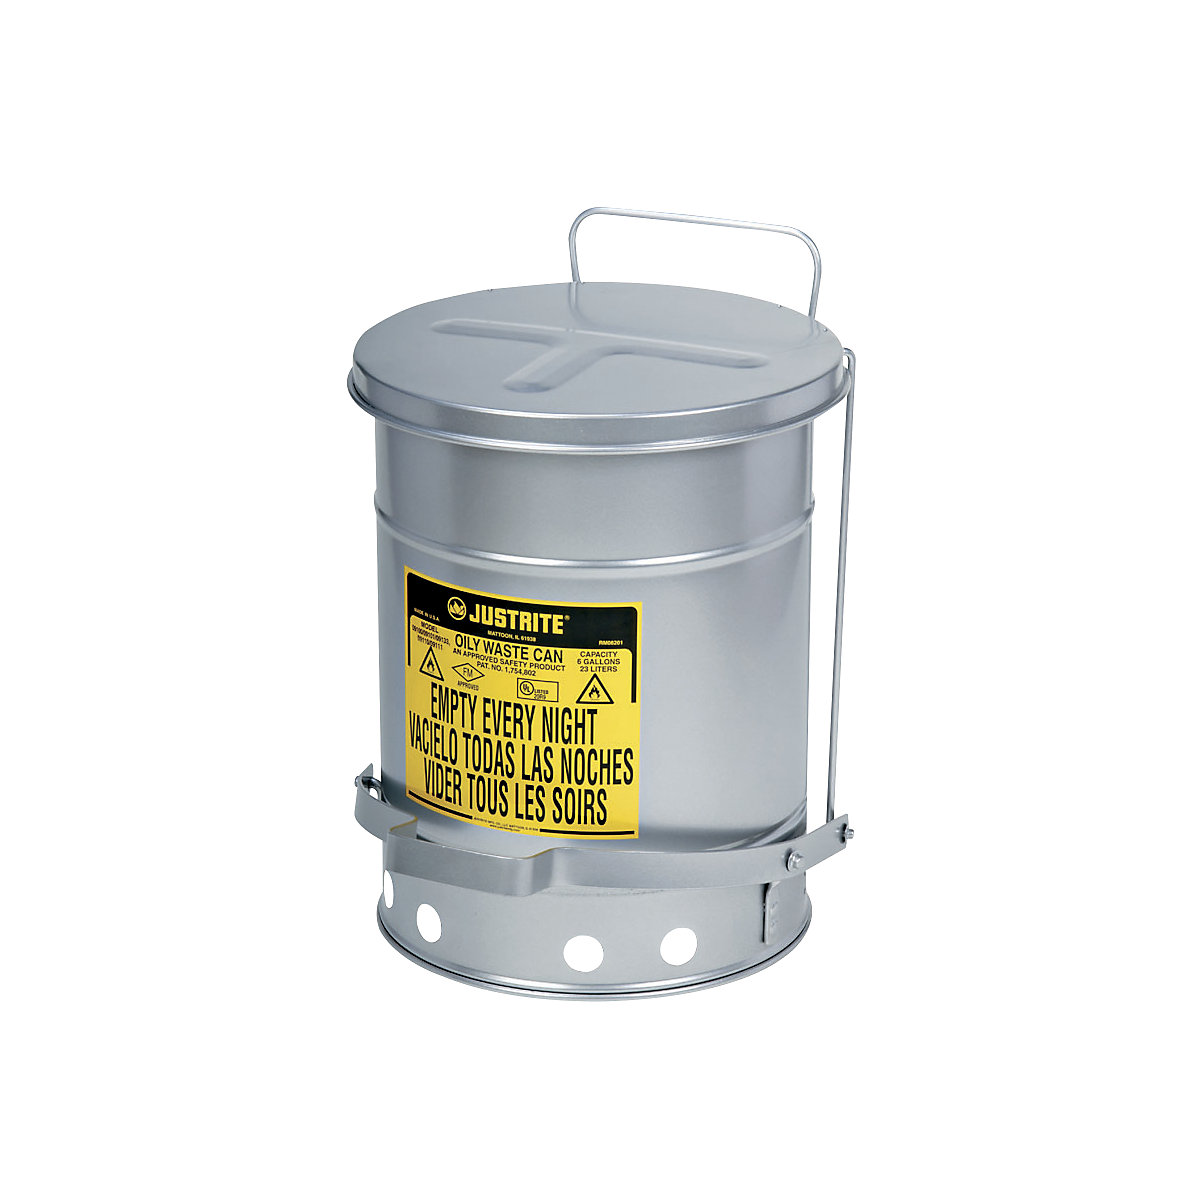 Low noise SoundGard™ safety disposal cans – Justrite, lid closes softly and quietly, painted silver, capacity 80 l-8